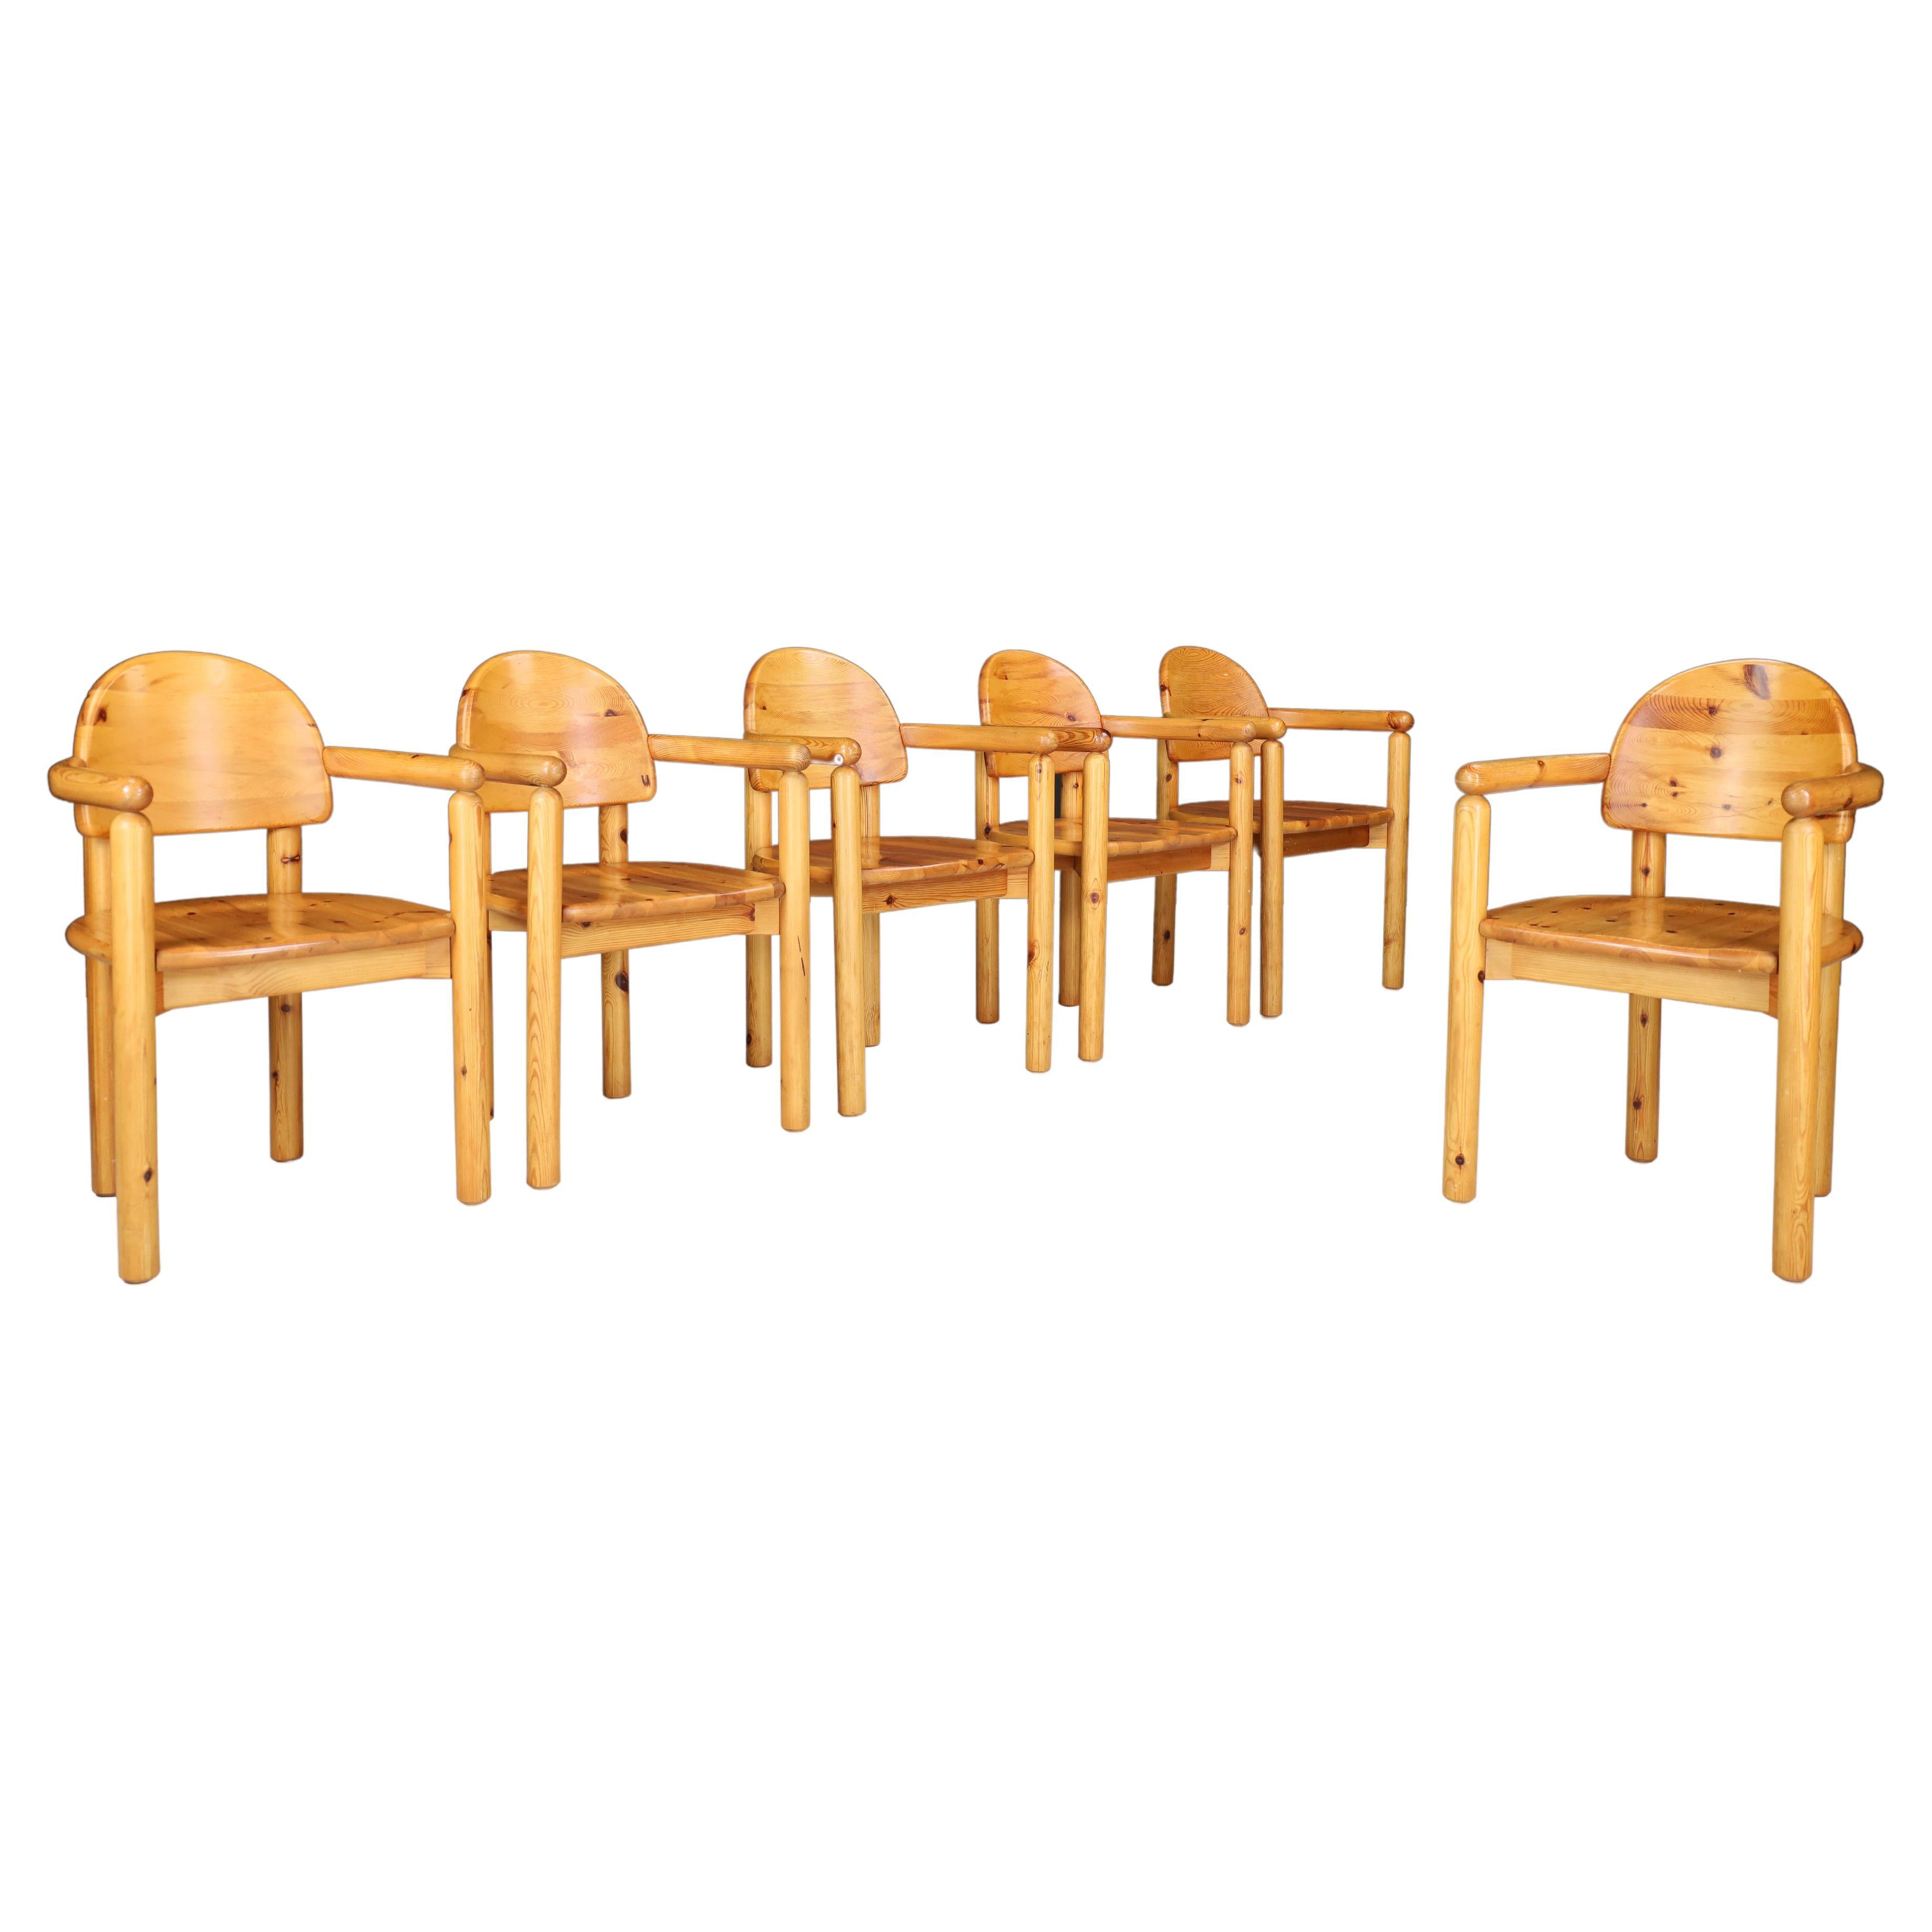 Rainer Daumiller Dining Room Chairs in Solid Pine, 1970s, Denmark Set/6 For Sale